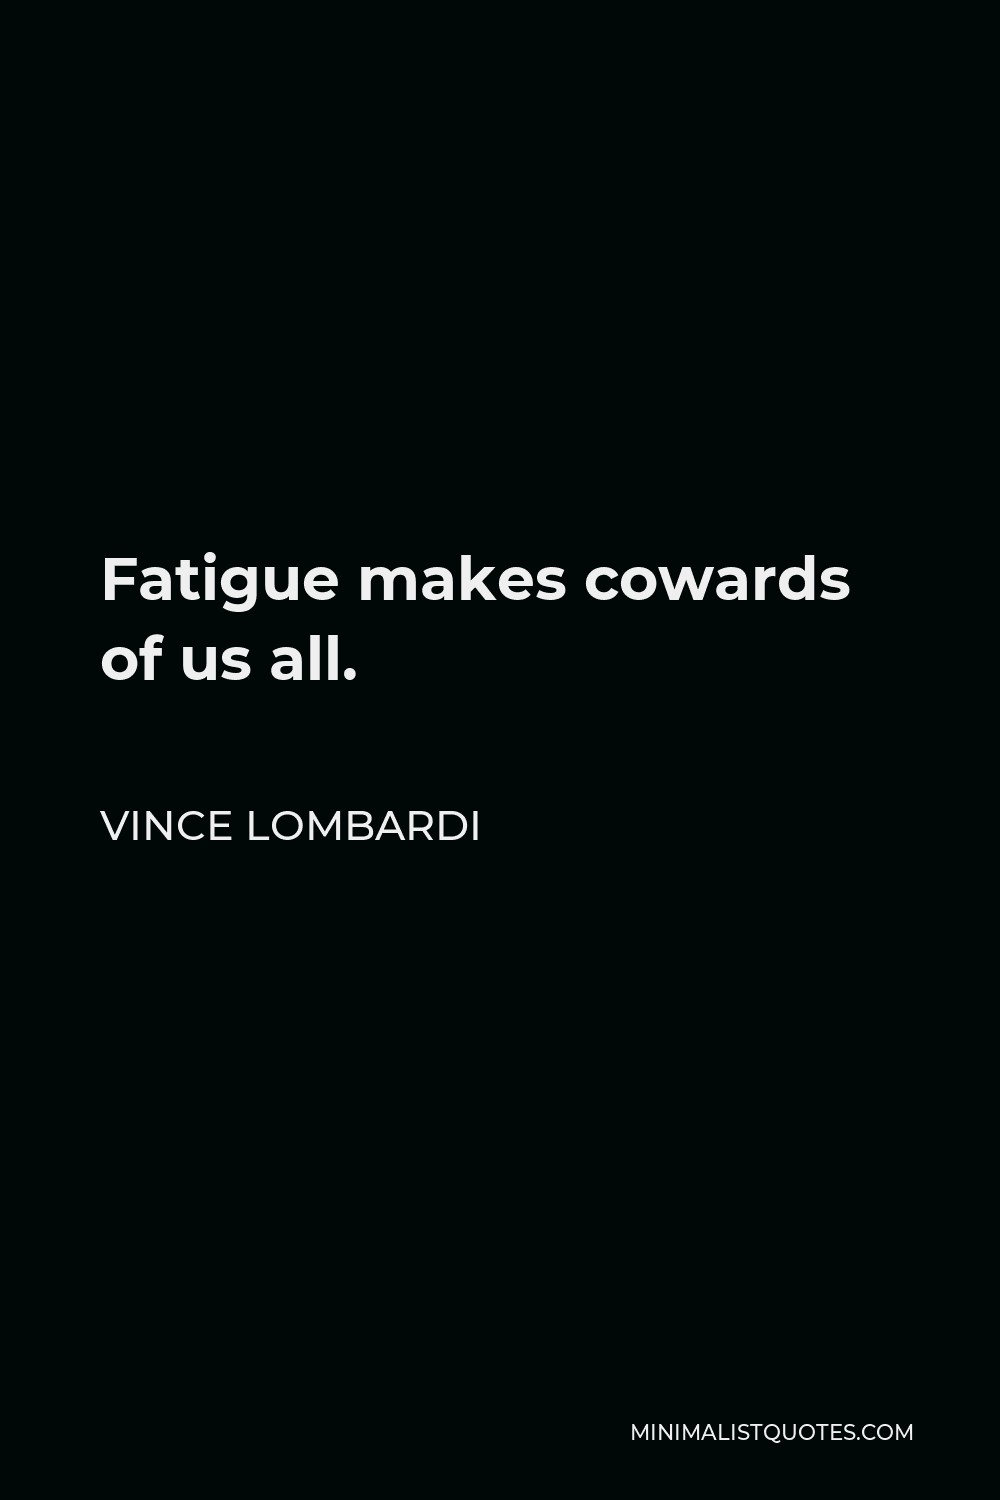 Vince Lombardi Quote - Fatigue makes cowards of us all.